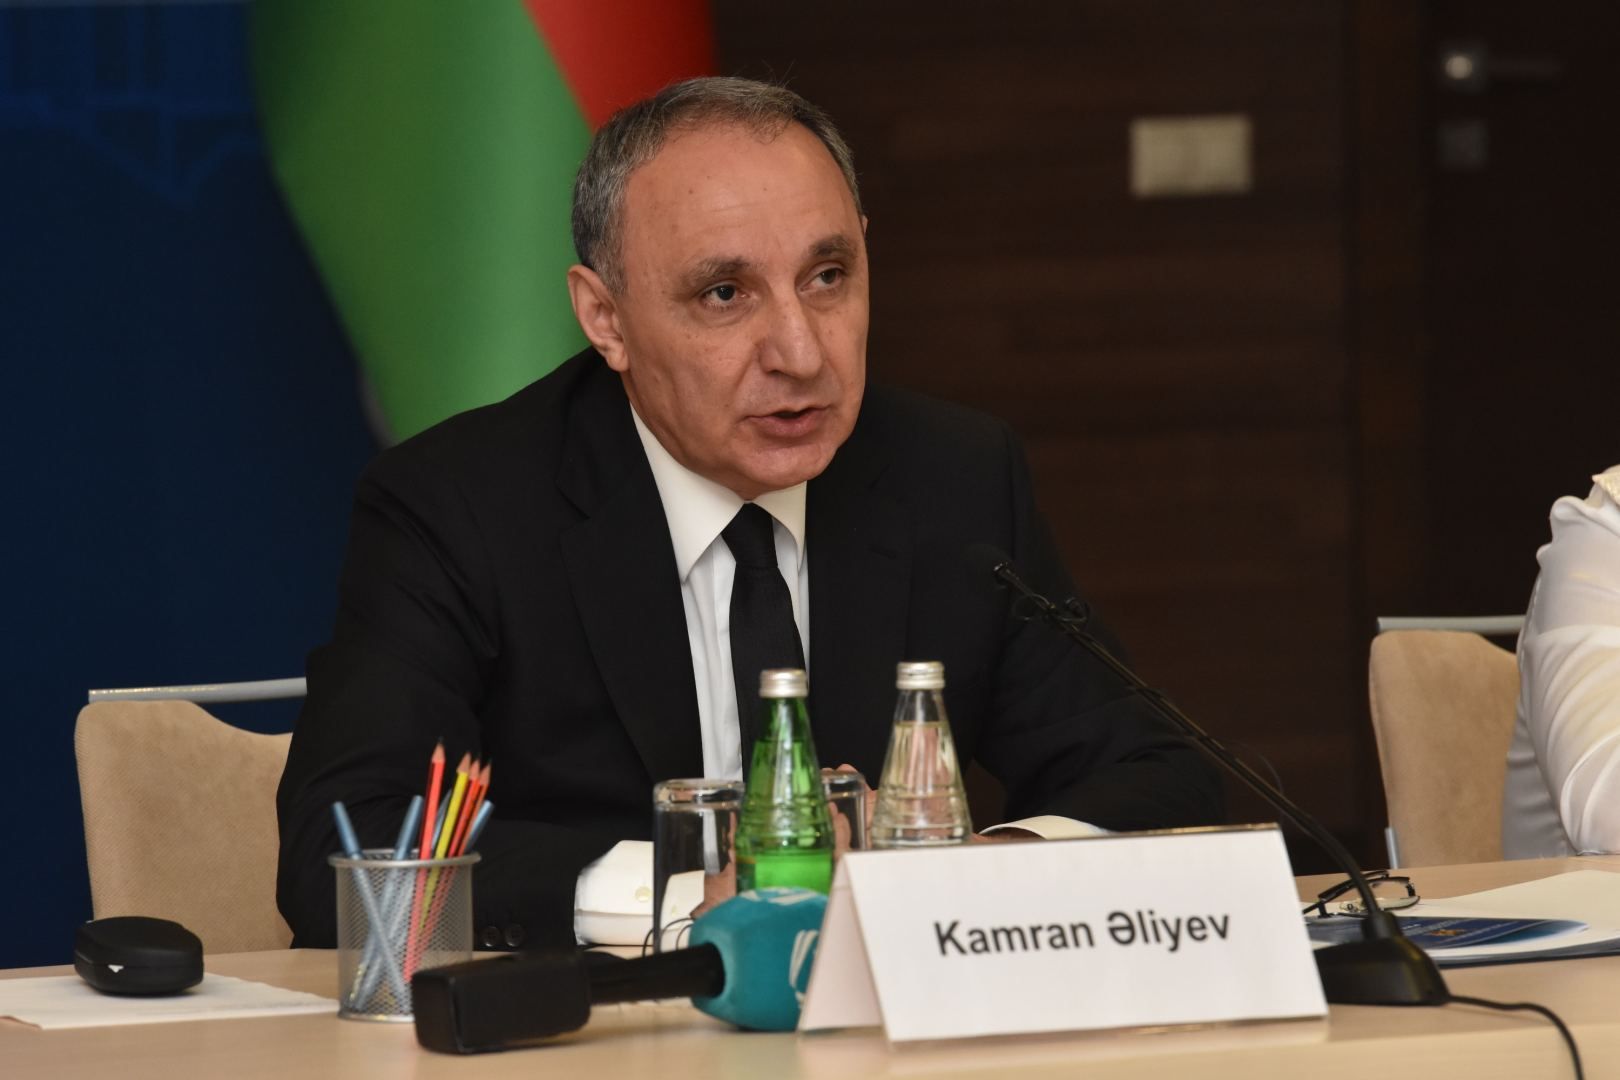 Official: All conditions for media development available in Azerbaijan